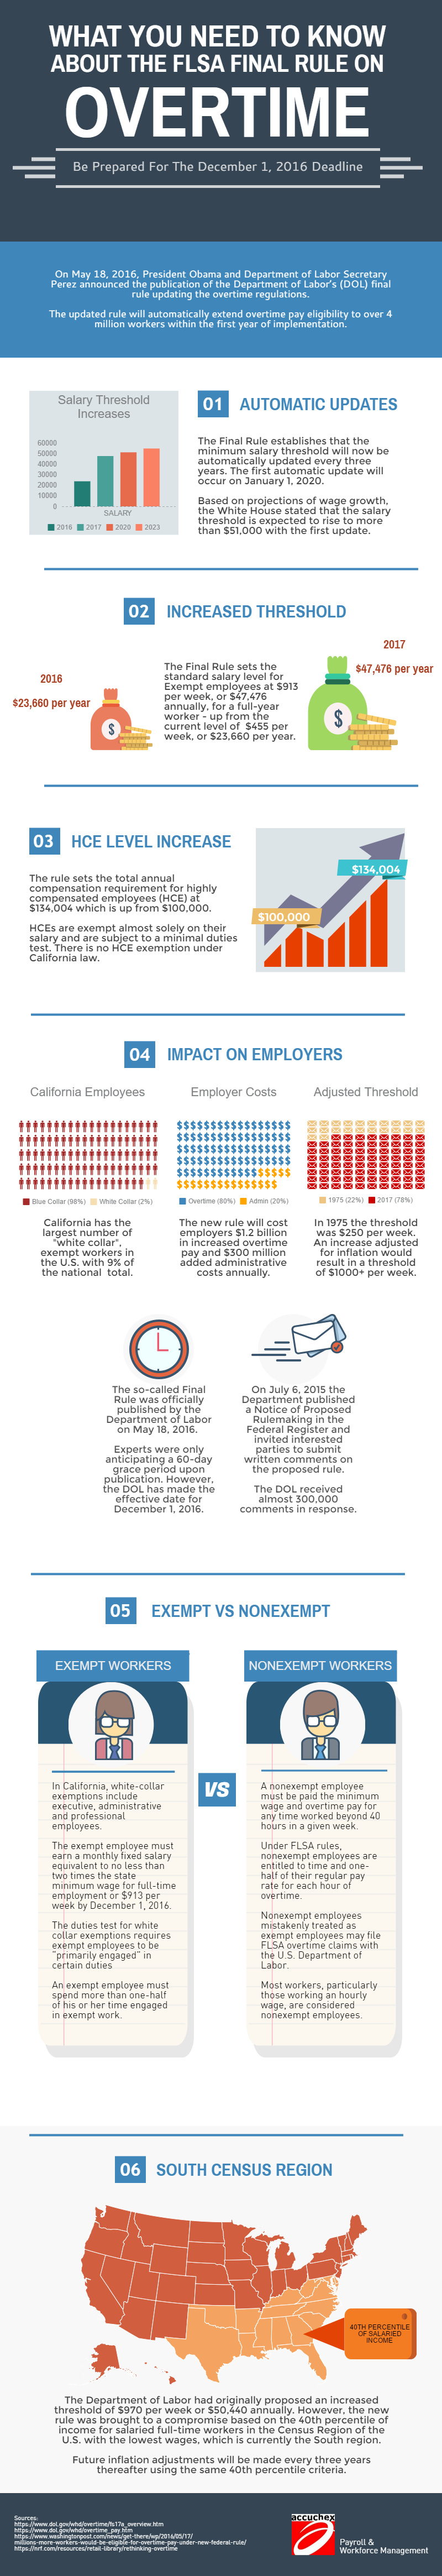 the-flsa-final-rule-and-employer-impact-infographic